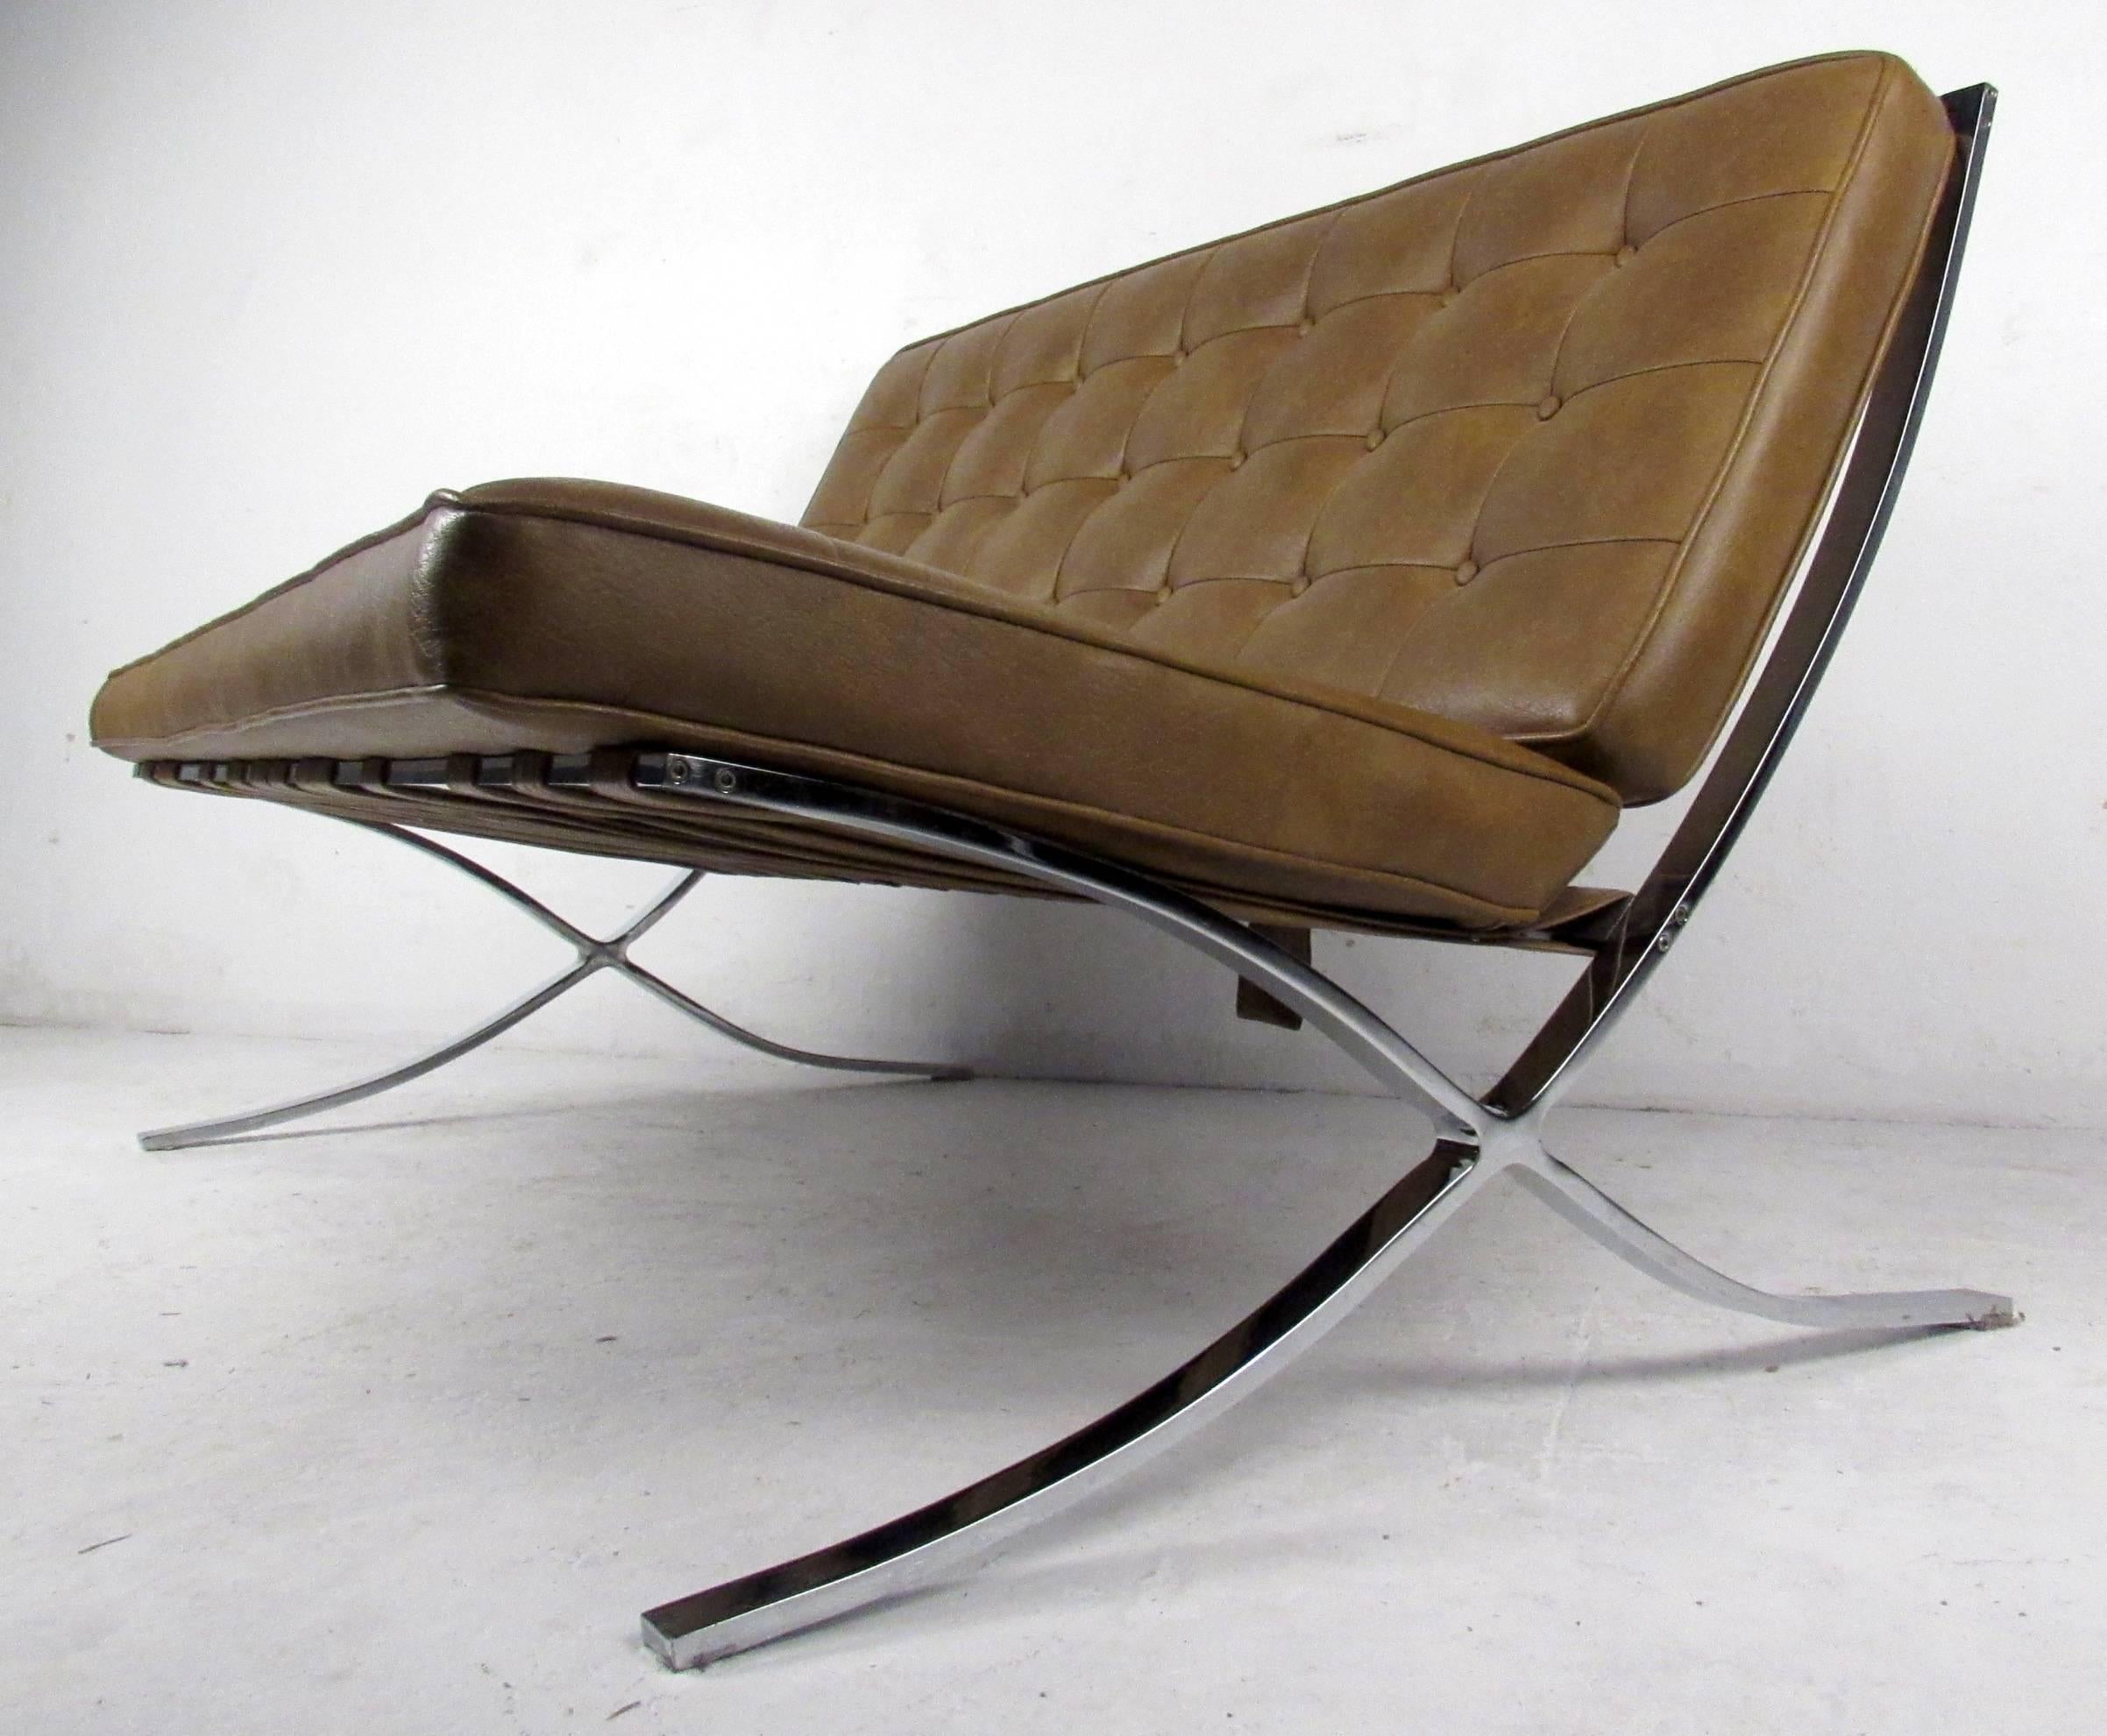 Vintage-modern Barcelona style settee featuring tufted vinyl upholstery and beautifully sculpted chrome base. Striking two seat sofa perfect for home or business seating arrangement in the mid-century style of mies van der rohe for Knoll. 

Please